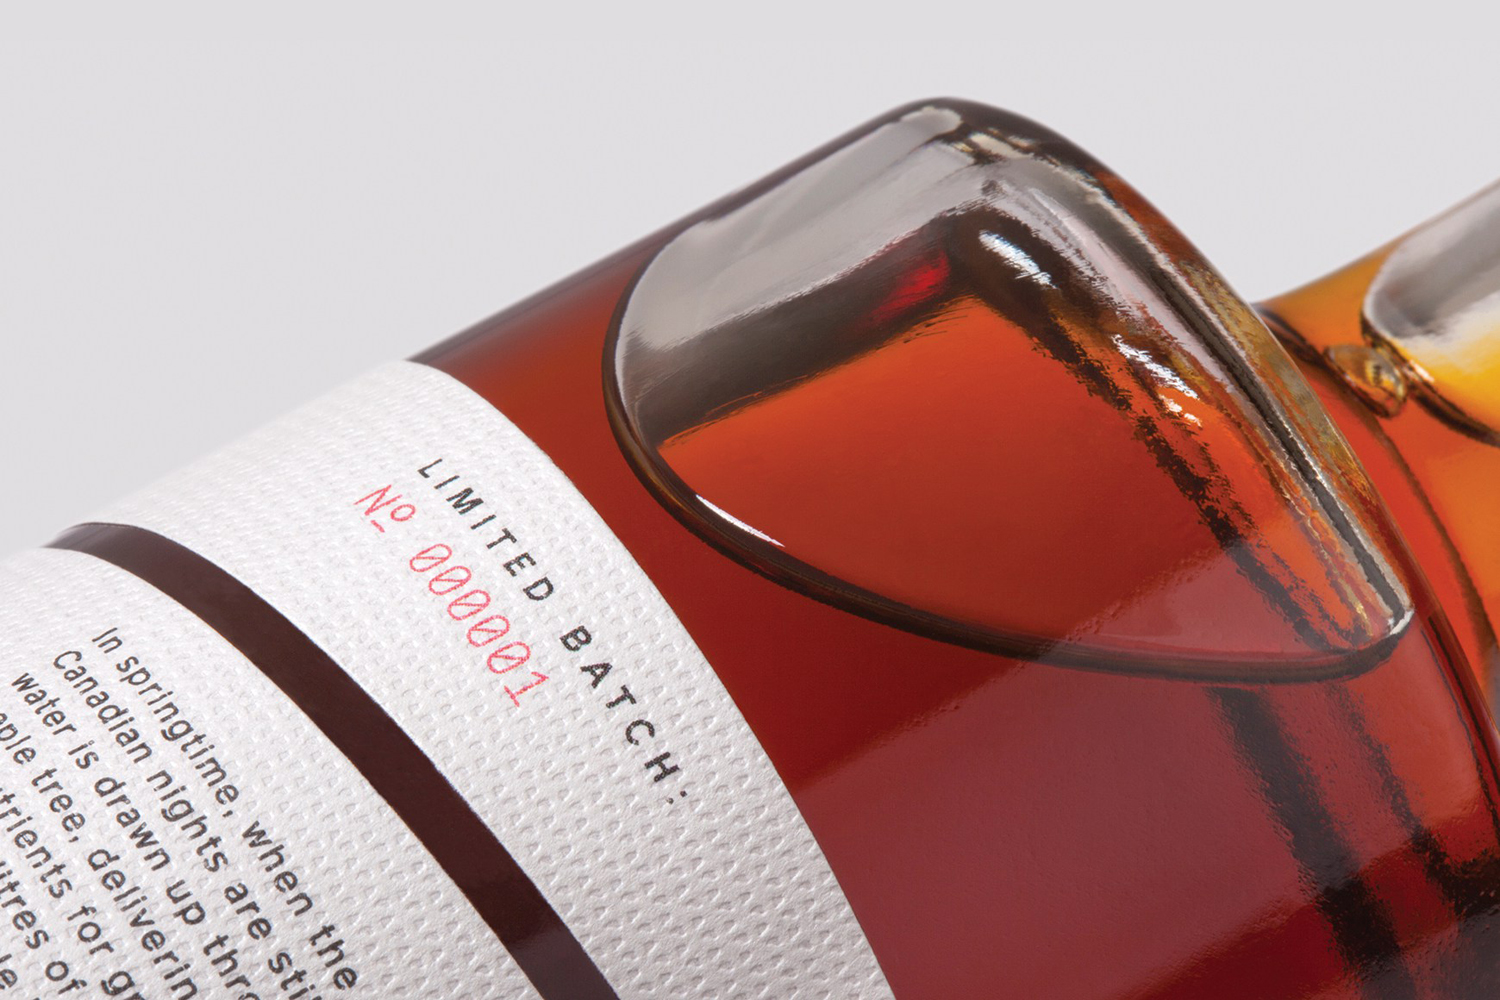 Premium maple syrup and packaging to celebrate UK-based graphic design studio Believe in's expansion into Canada